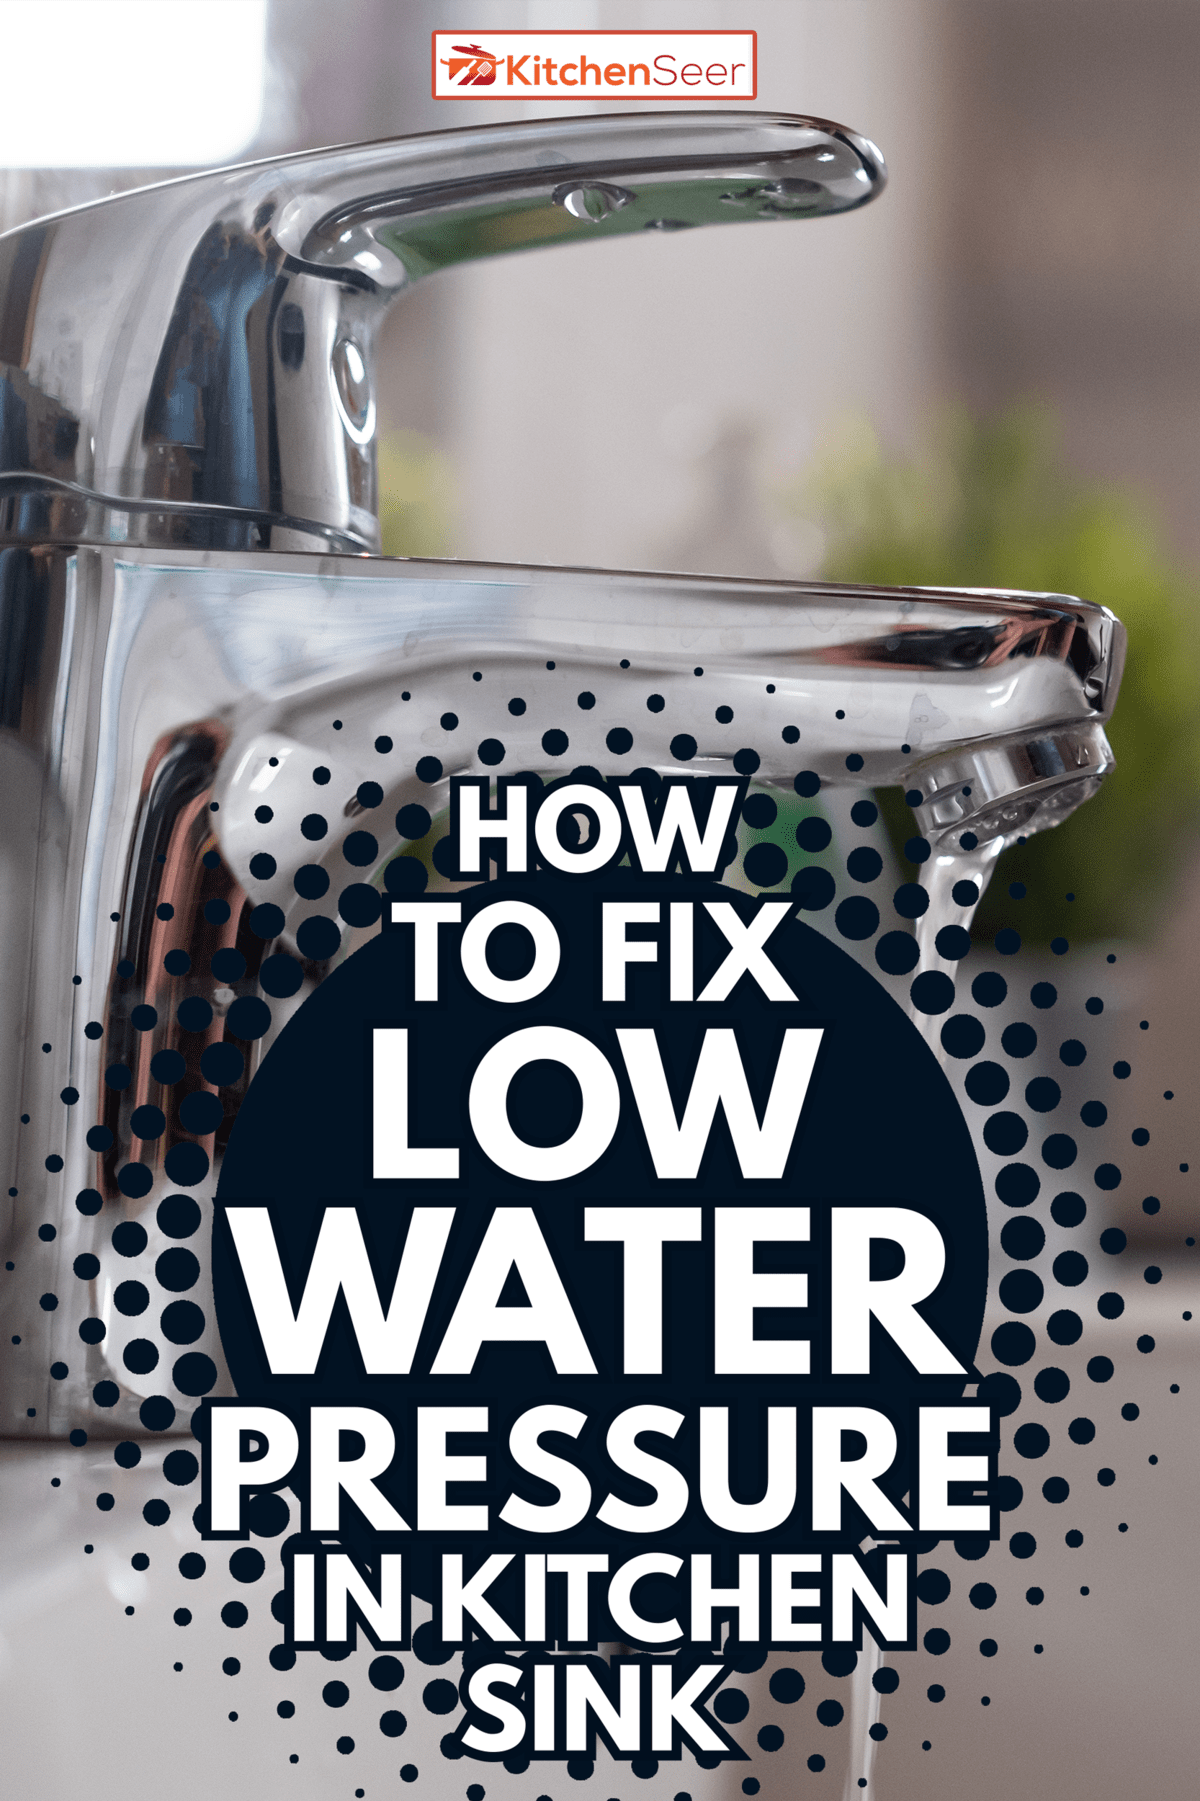 Open chrome faucet washbasin with low water pressure - How To Fix Low Water Pressure In Kitchen Sink